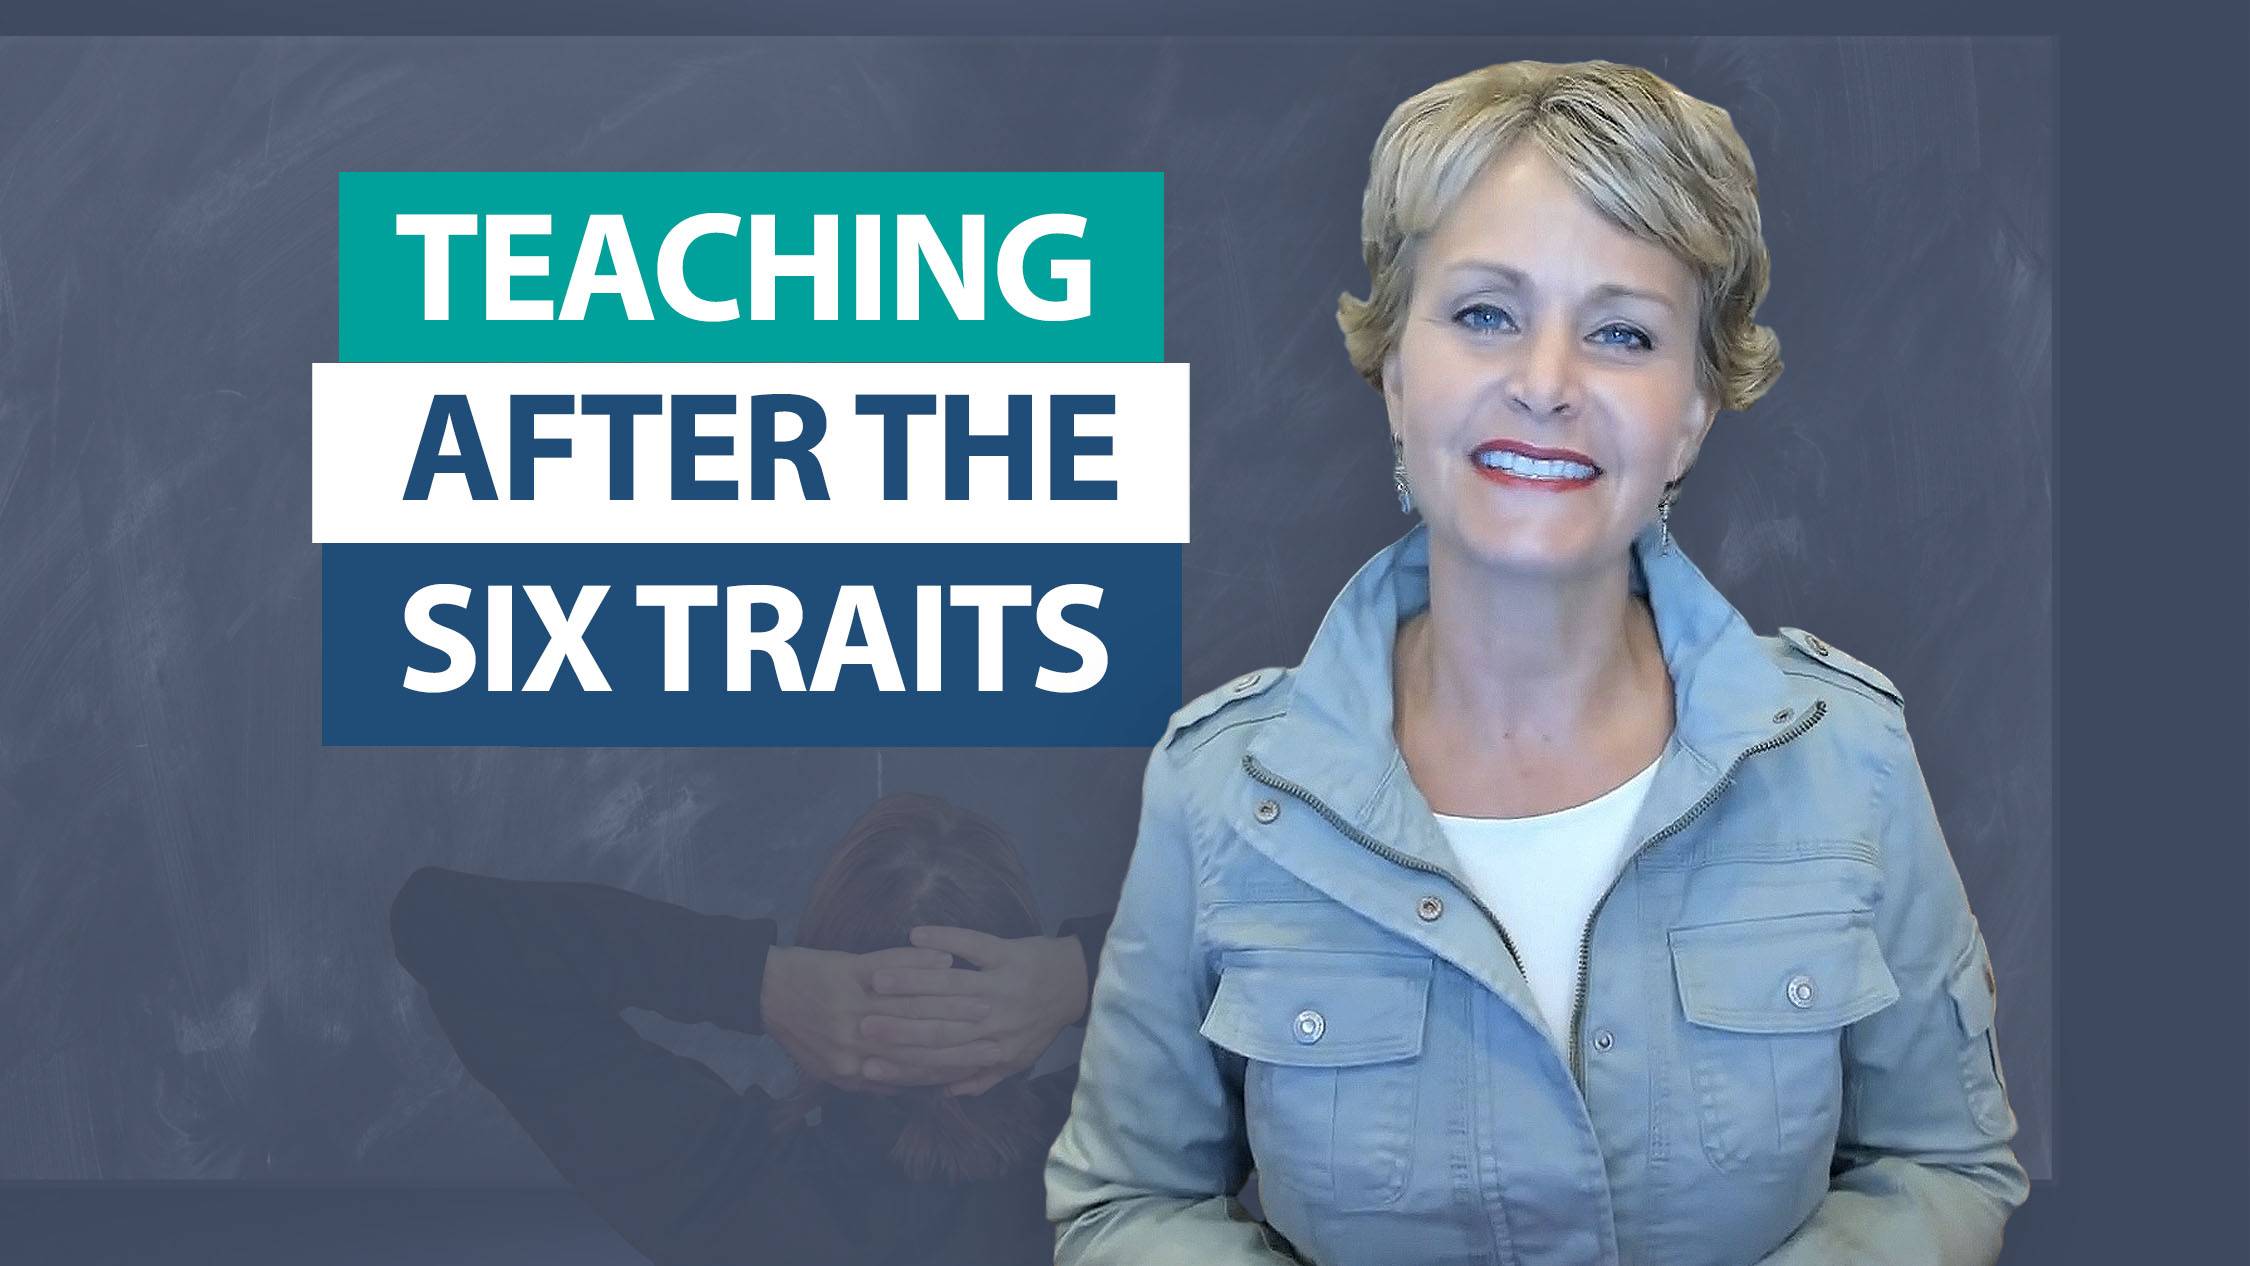 What do you teach after introducing the Six Traits of Writing?